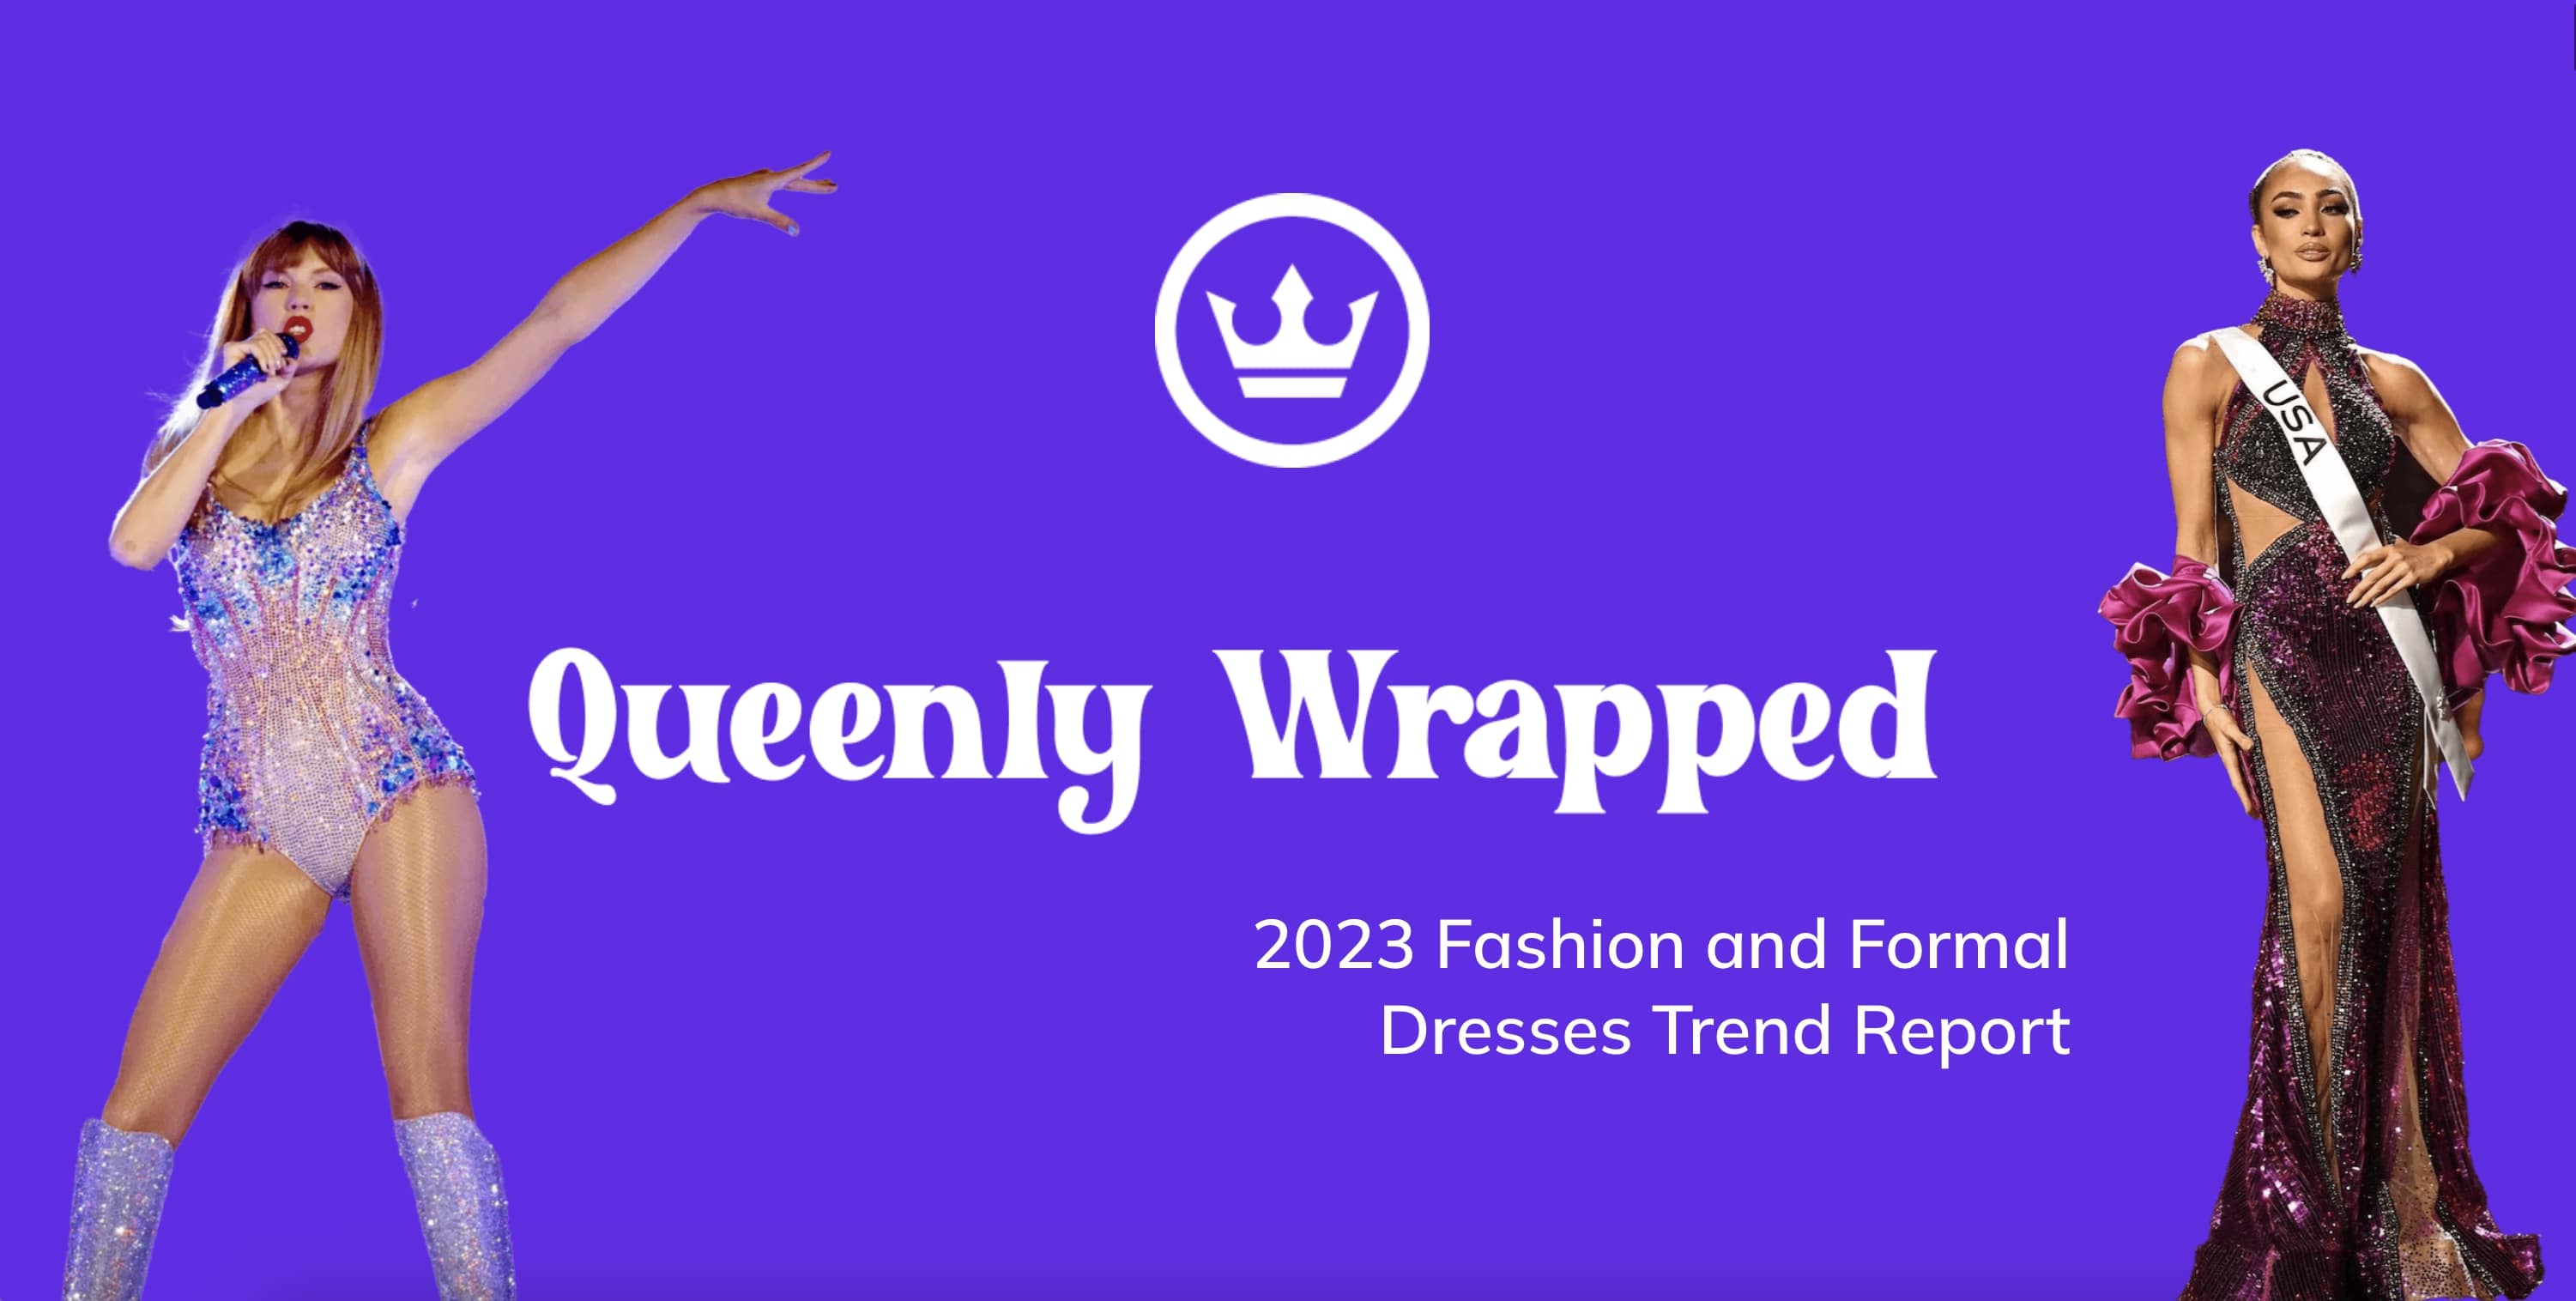 Read the 2023 Fashion and Formal Dresses Trend Report